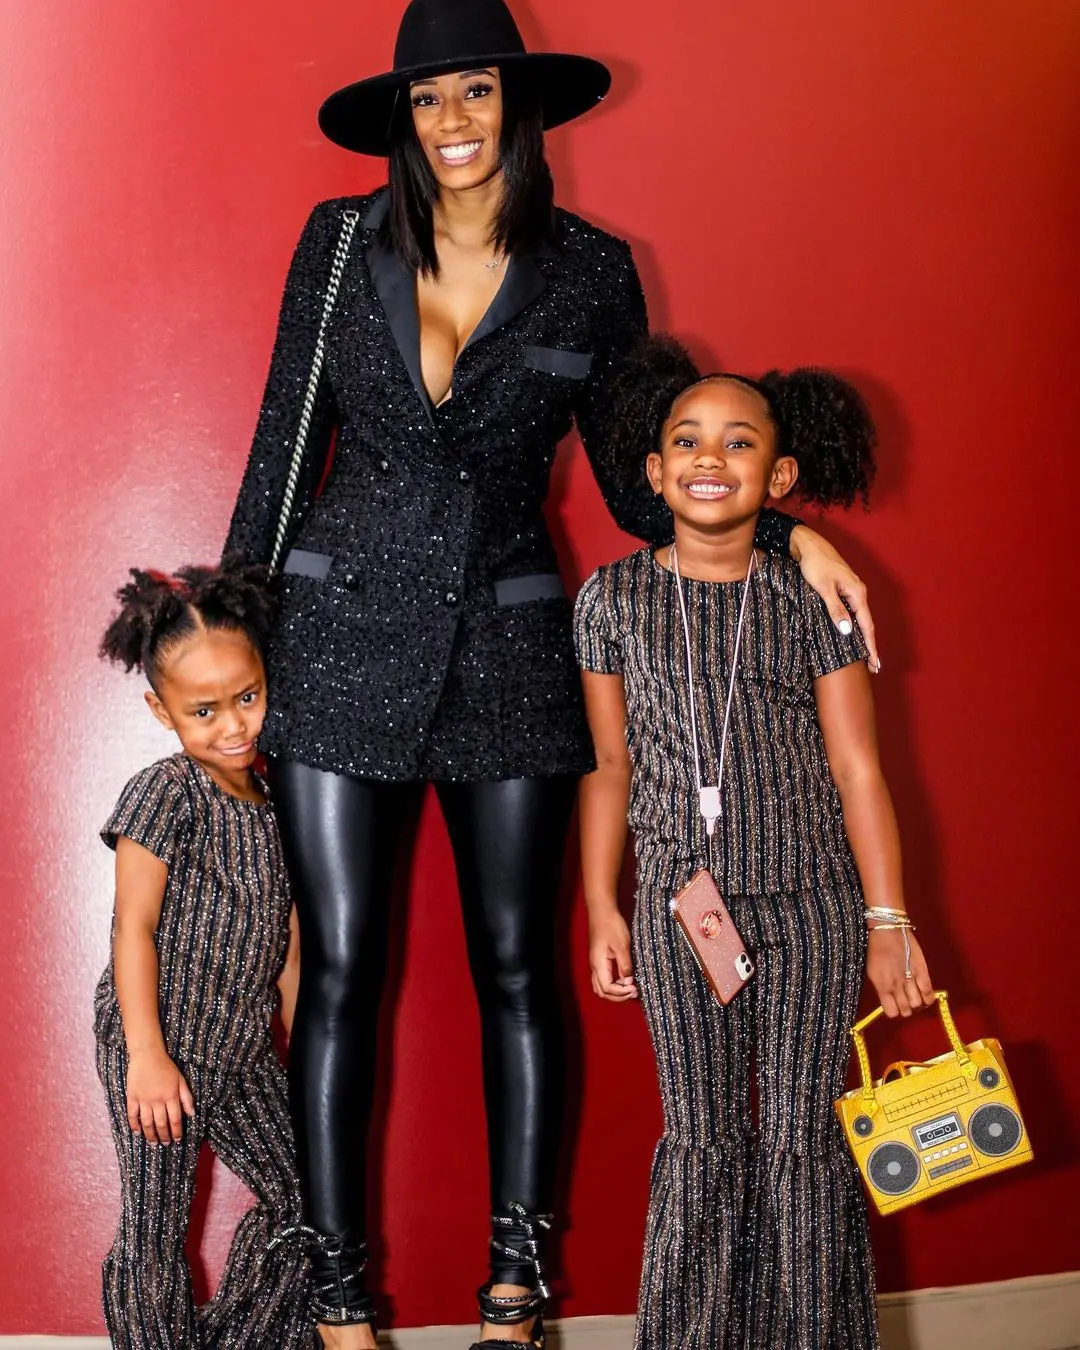 Kiara Morrison poses for photos with her two baby girls